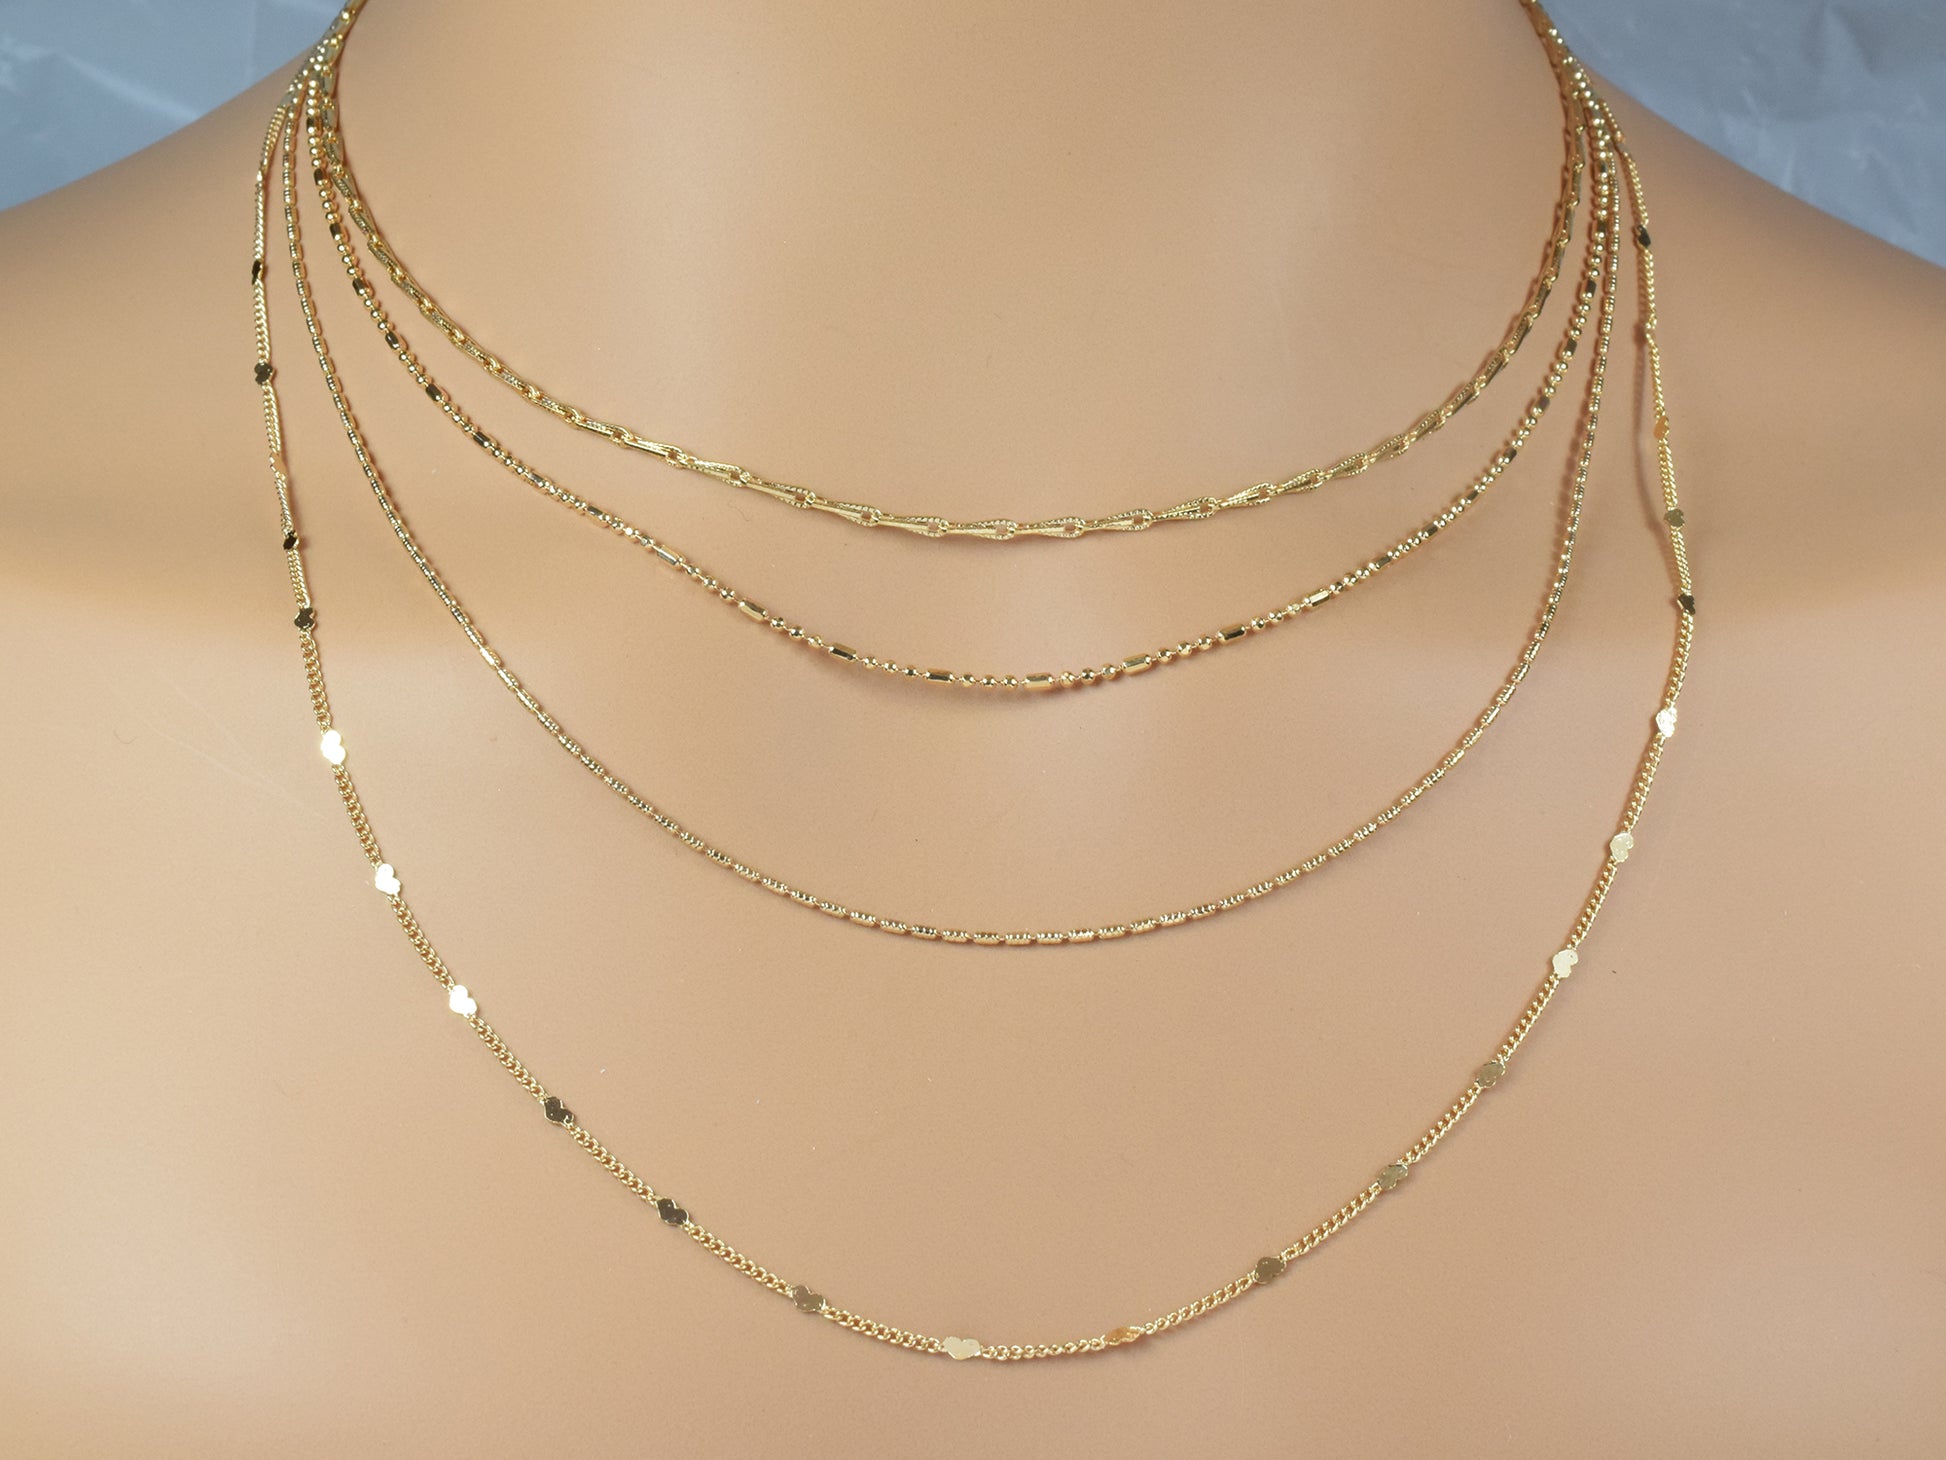 Gold Filled Beaded Chain Selection - Barleycorn, Heart Cuban, Beaded Tube, and Beaded Chain Designs